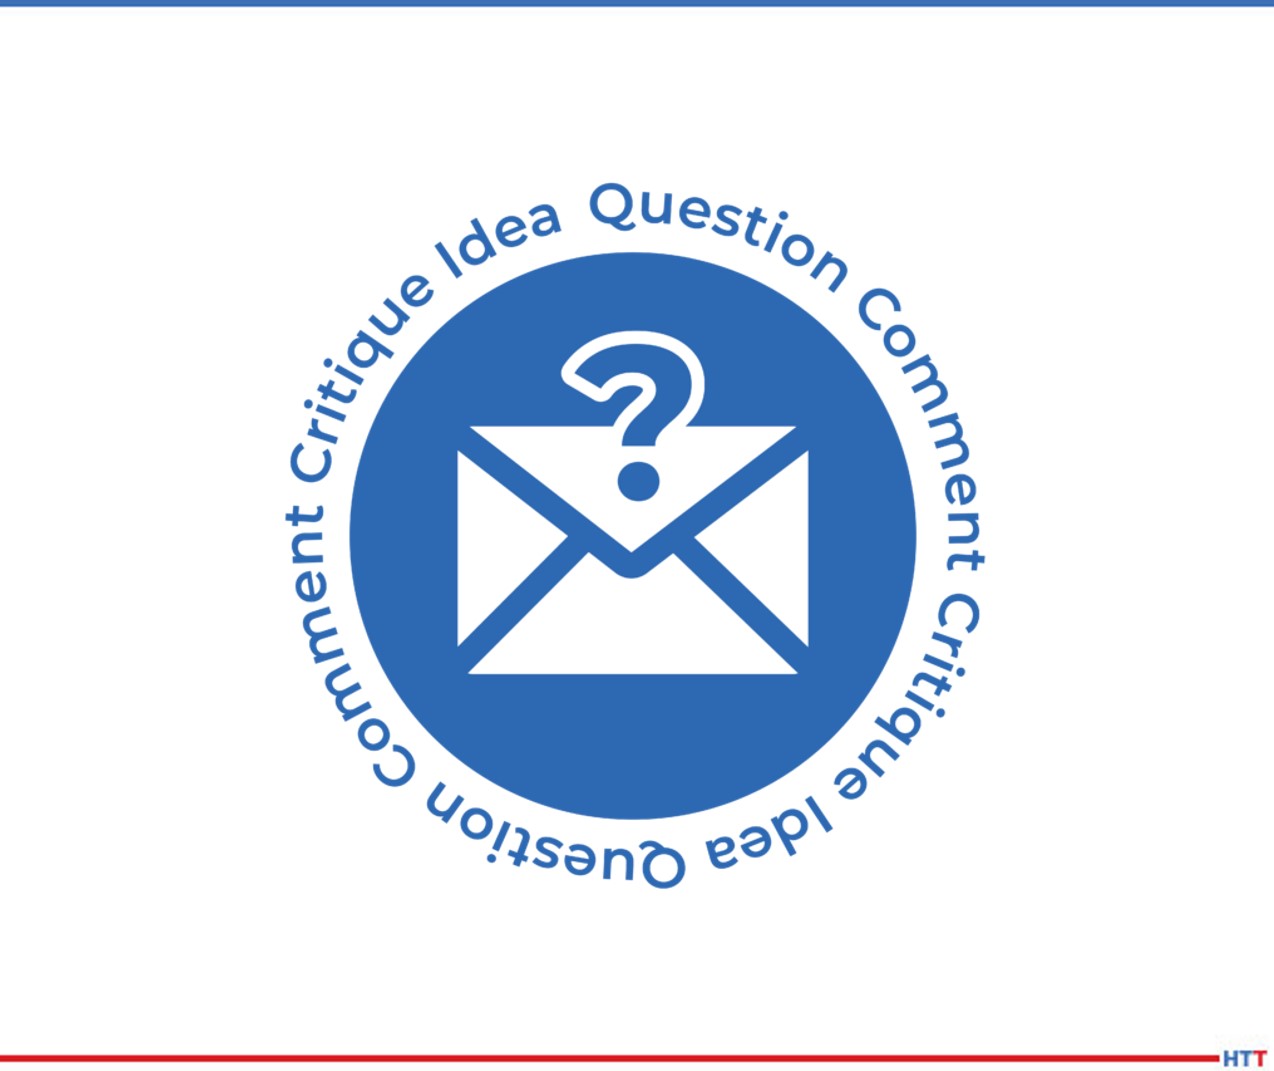 An icon of an envelope and a question mark